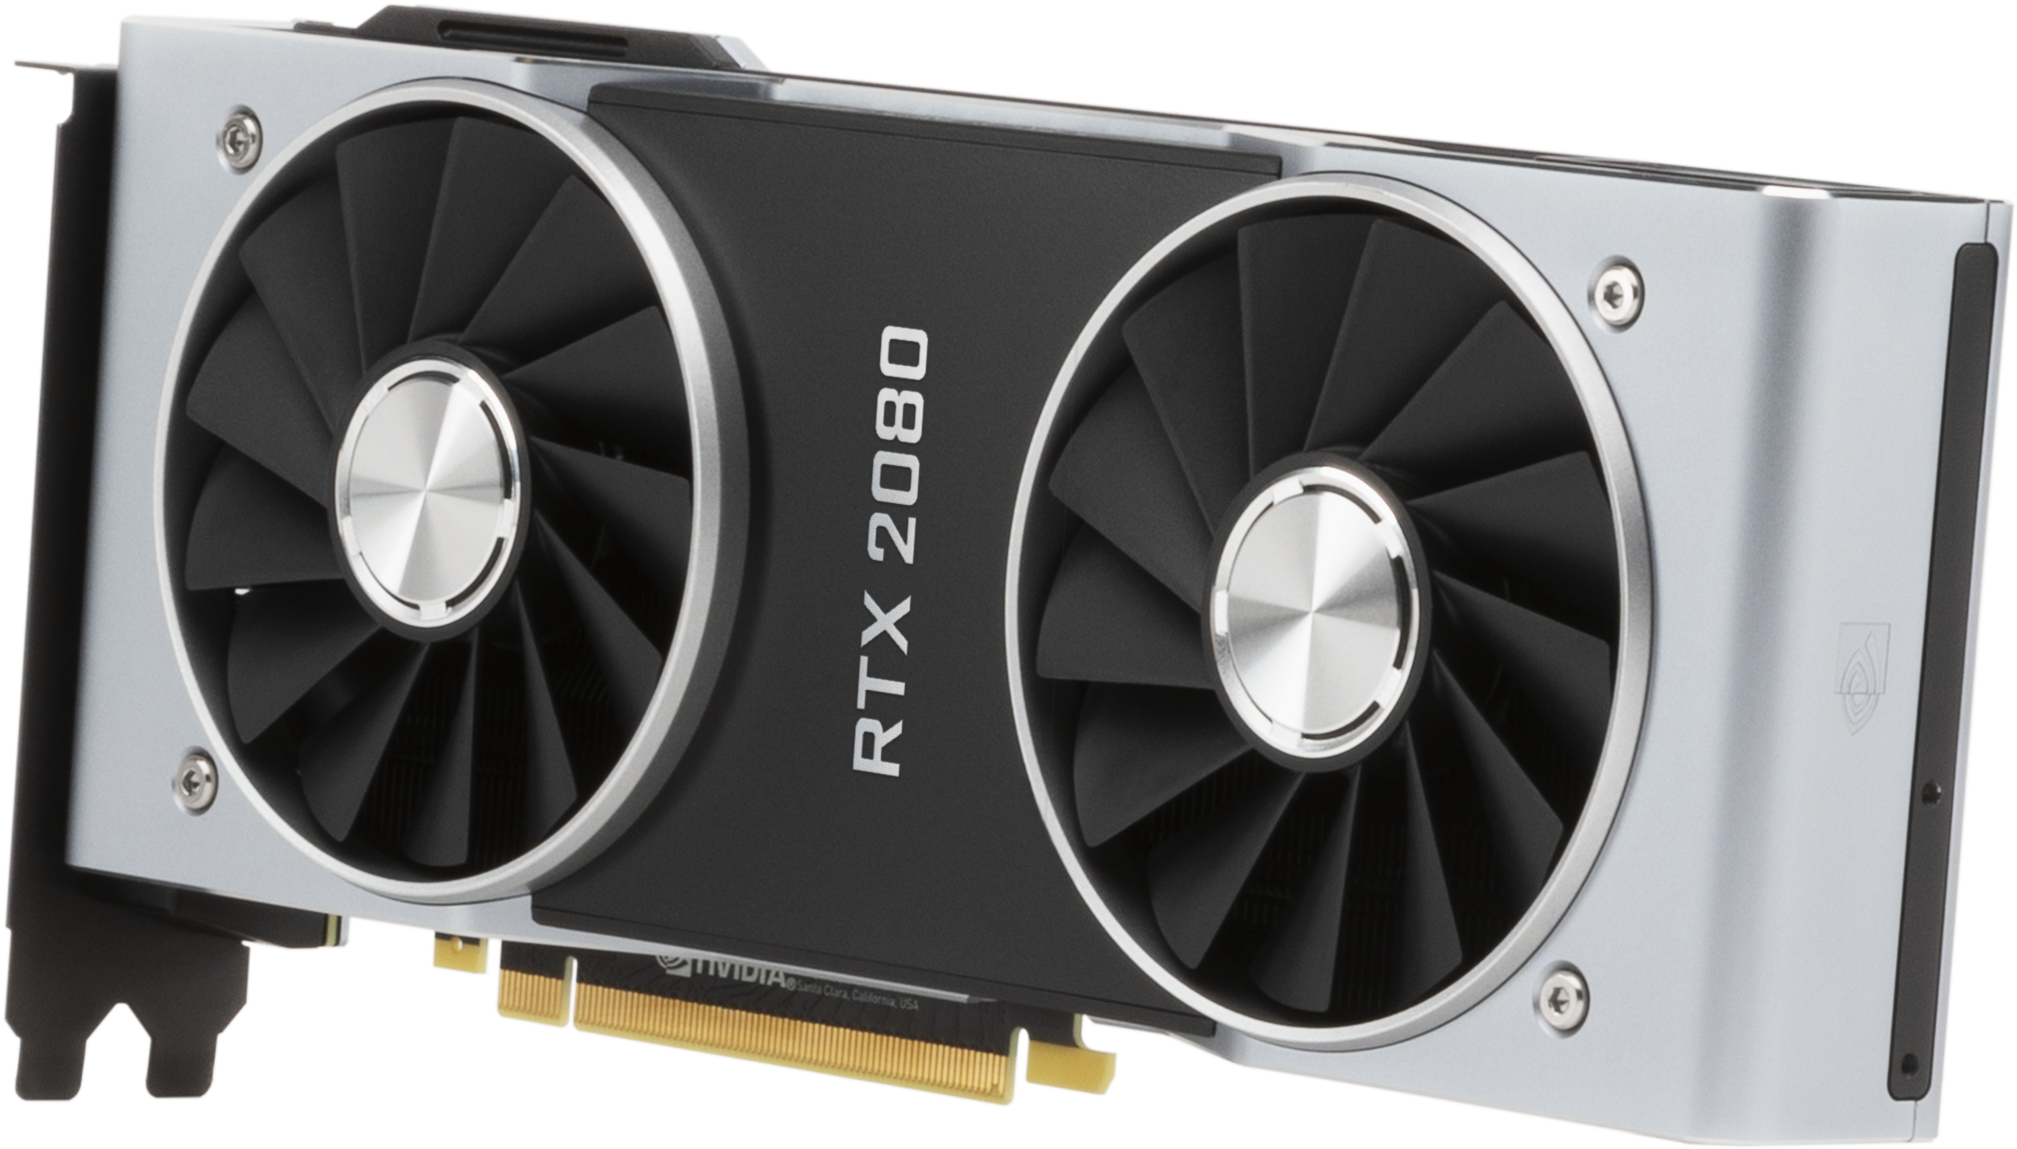 Geforce Rtx - Nvidia 2080 Founders Edition (2376x1530), Png Download